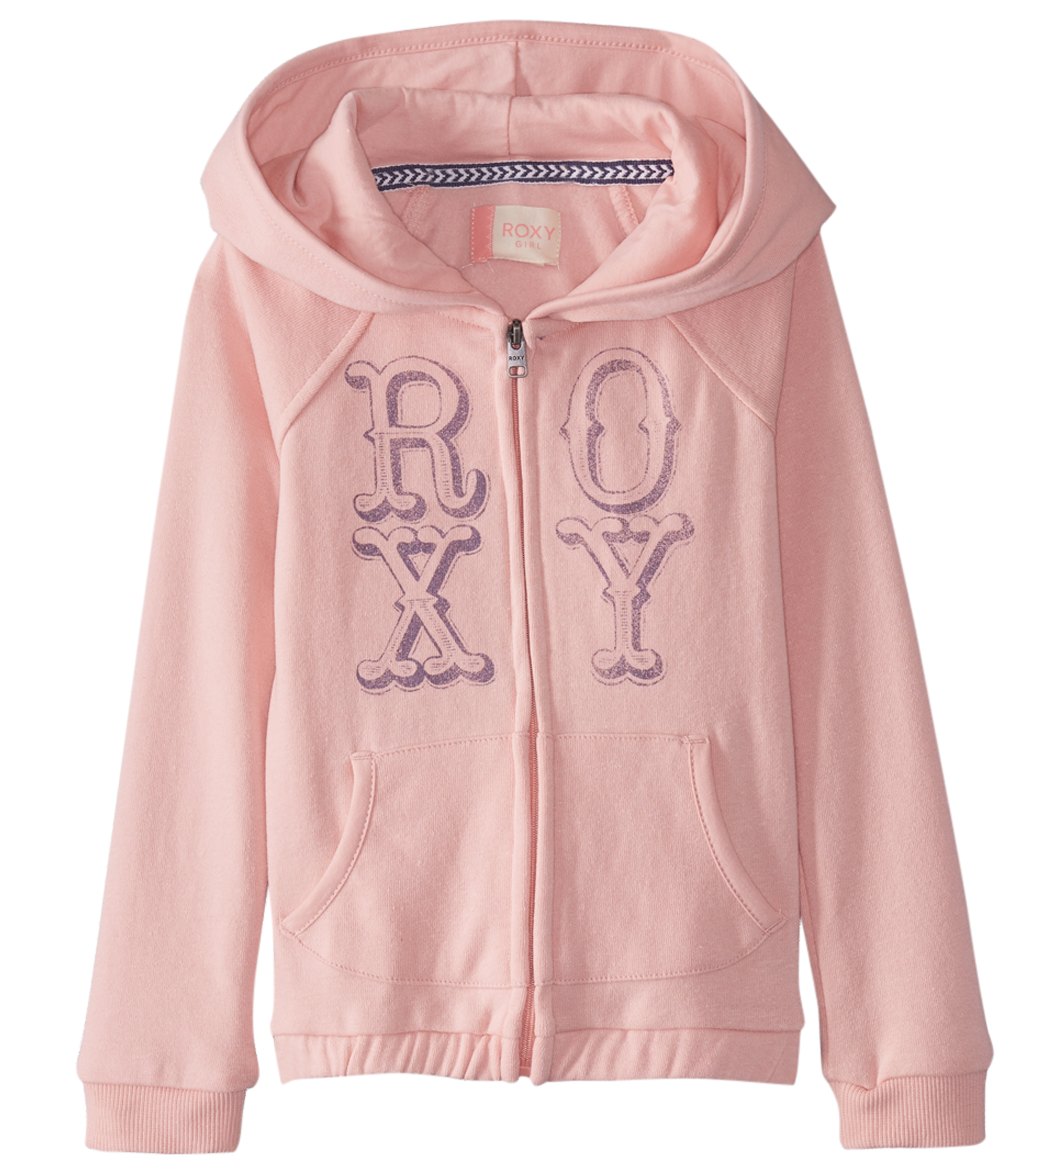 Roxy Girls' Holding On Zipped Hoodie - Mellow Rose 2 Cotton/Polyester - Swimoutlet.com